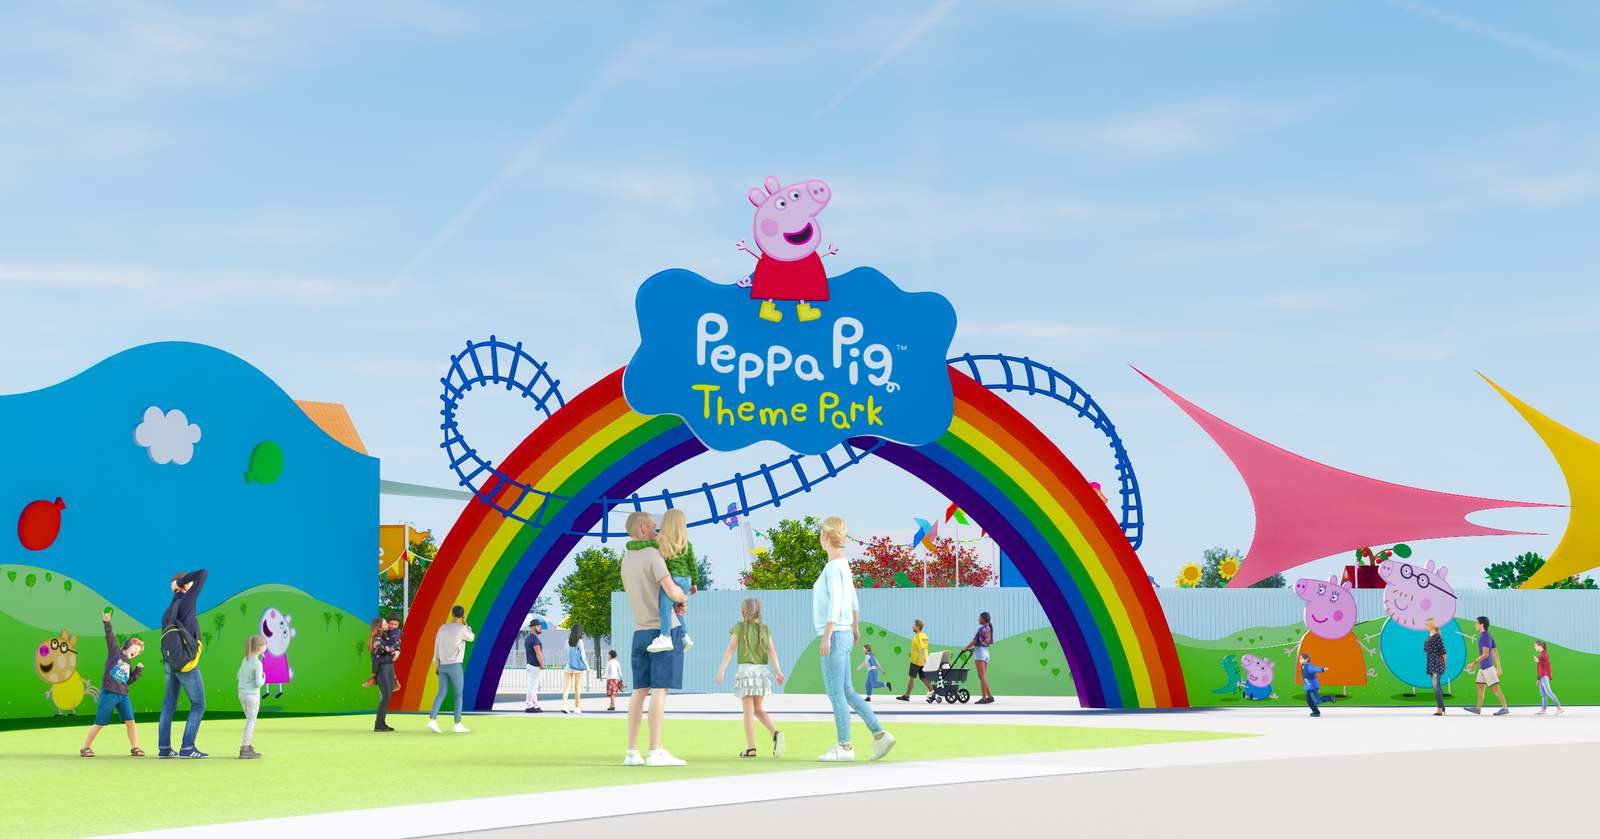 World’s first-ever Peppa Pig theme park set to open in Florida in 2022